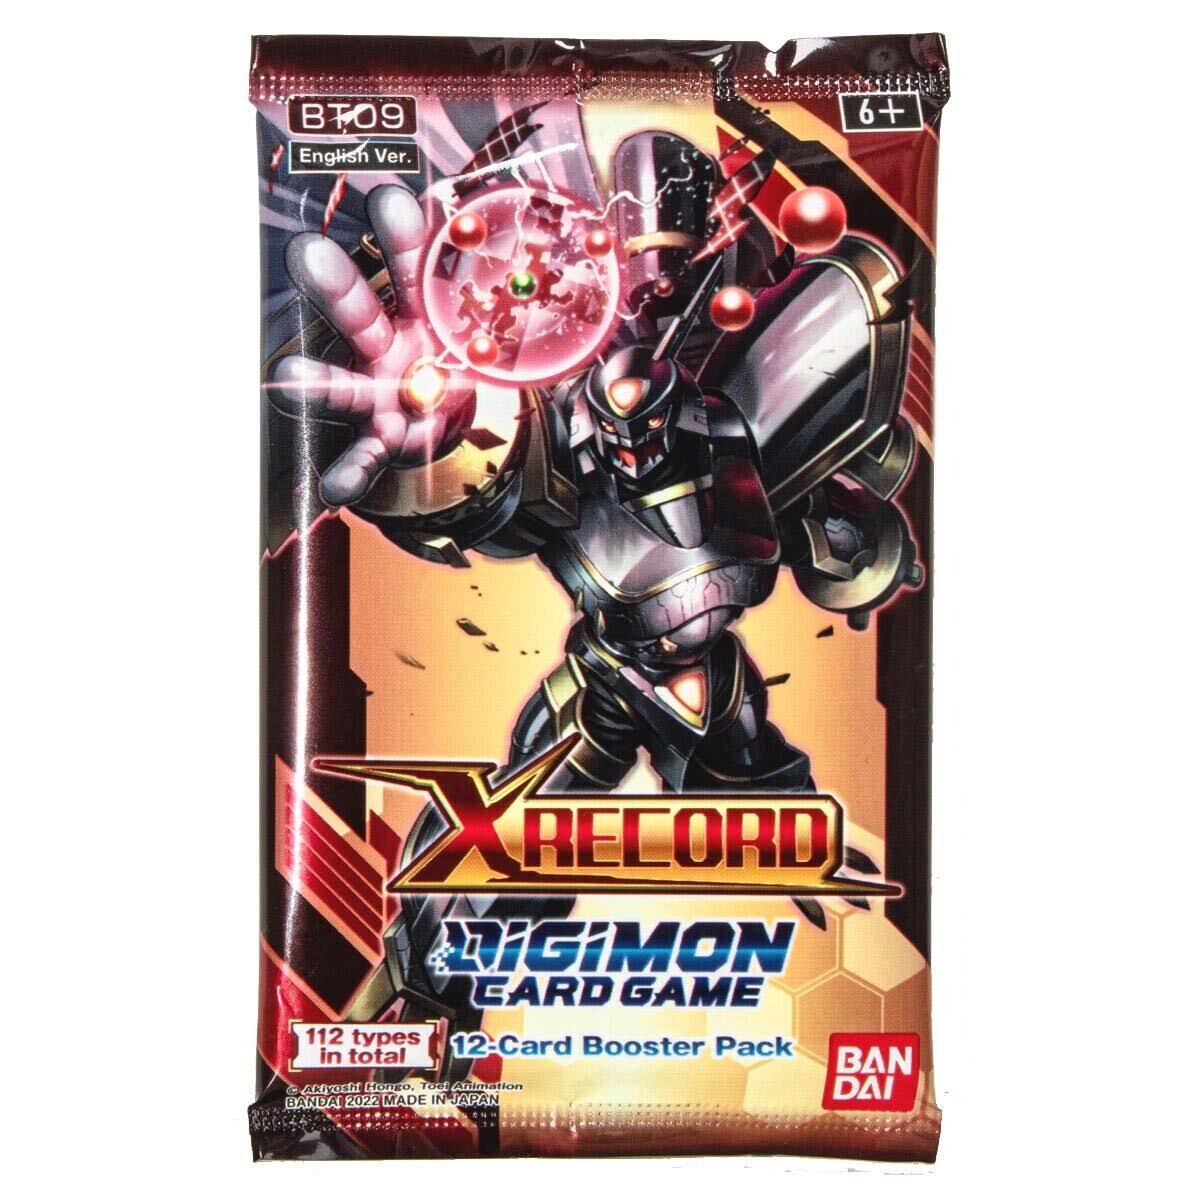 DIGIMON X RECORD BOOSTER PACK